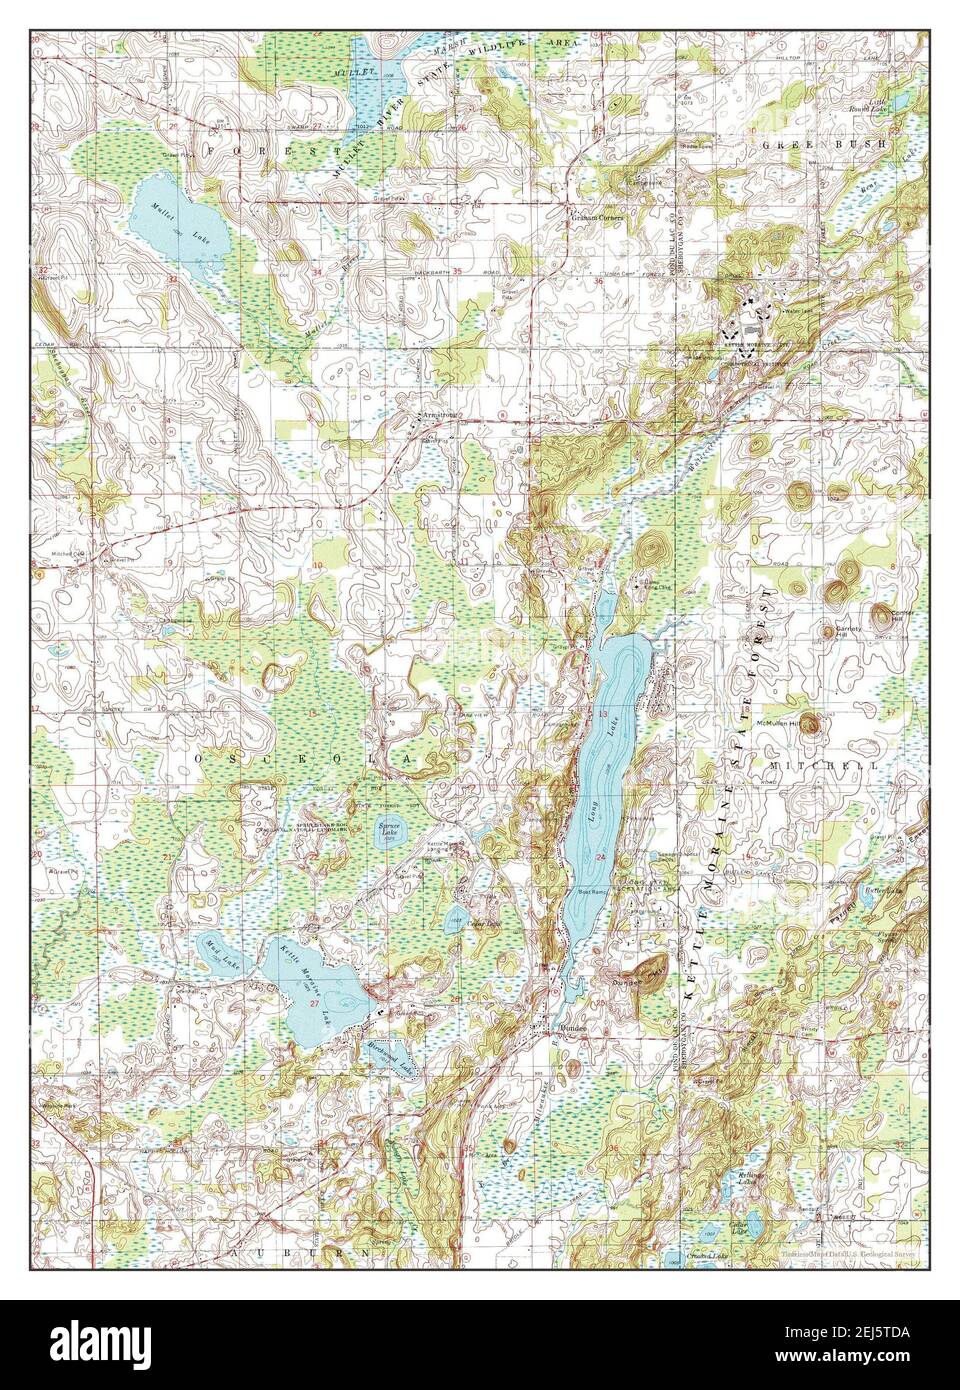 Dundee, Wisconsin, map 1999, 1:24000, United States of America by Timeless Maps, data U.S. Geological Survey Stock Photo